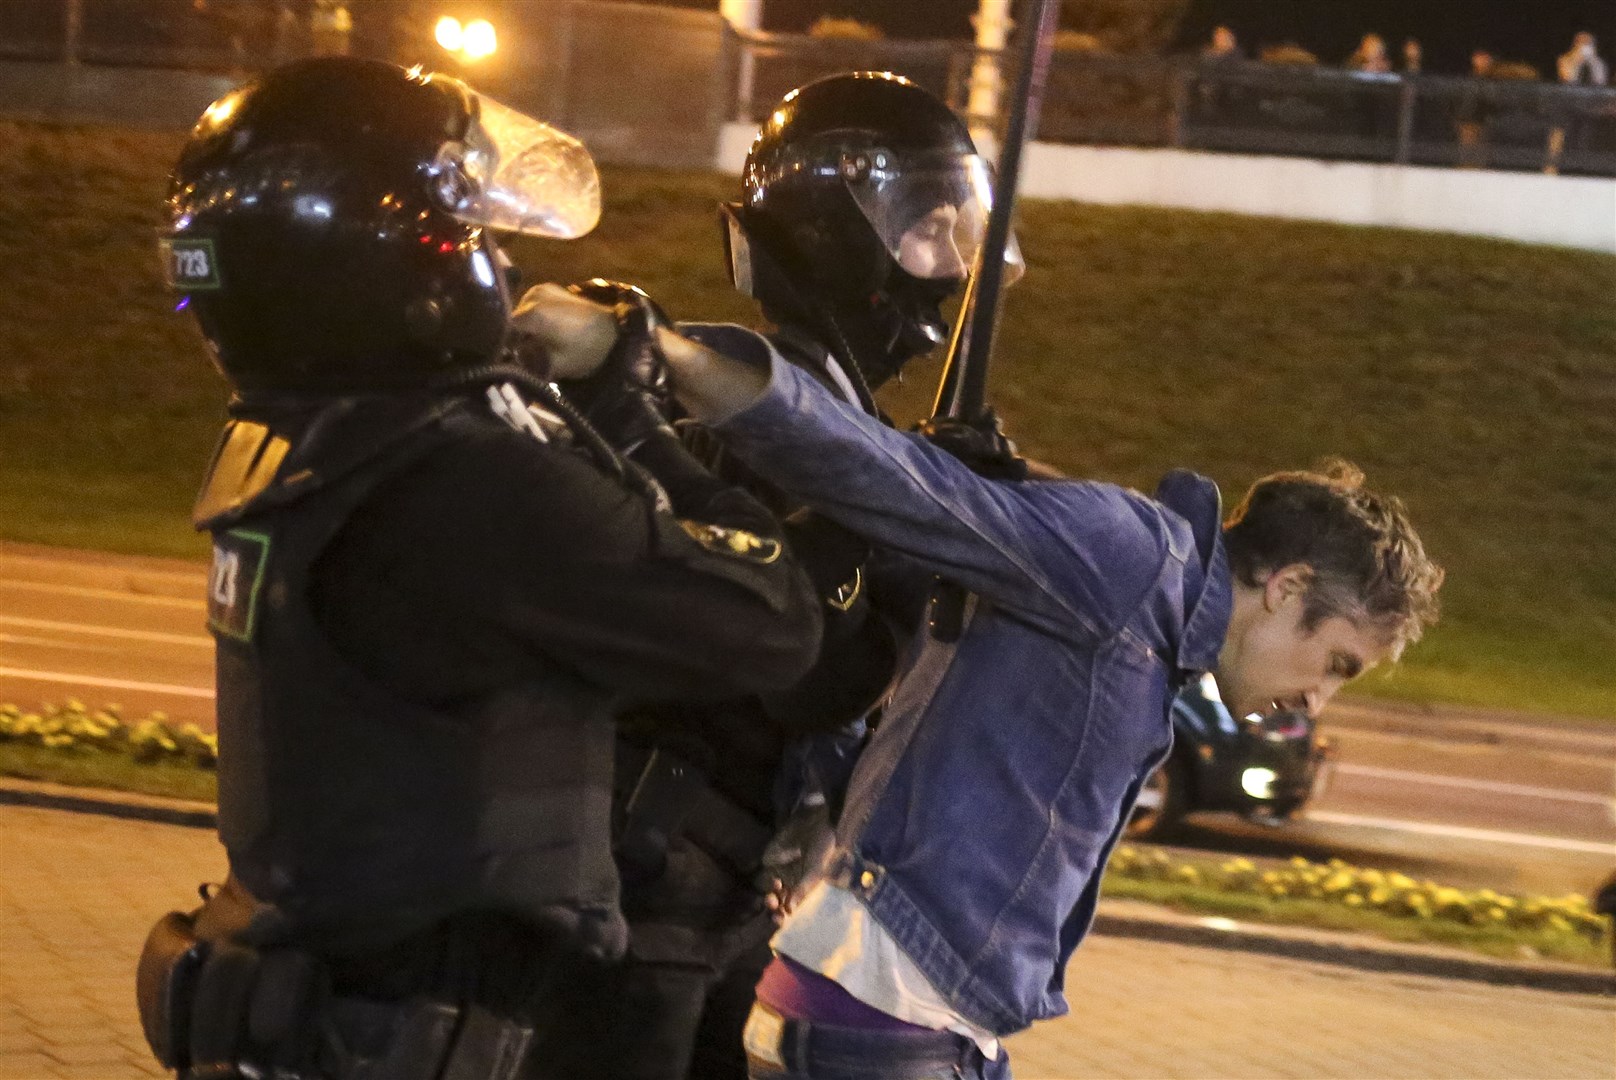 Riot police detain a protester during an opposition rally in Minsk, Belarus (TUT.by/AP)